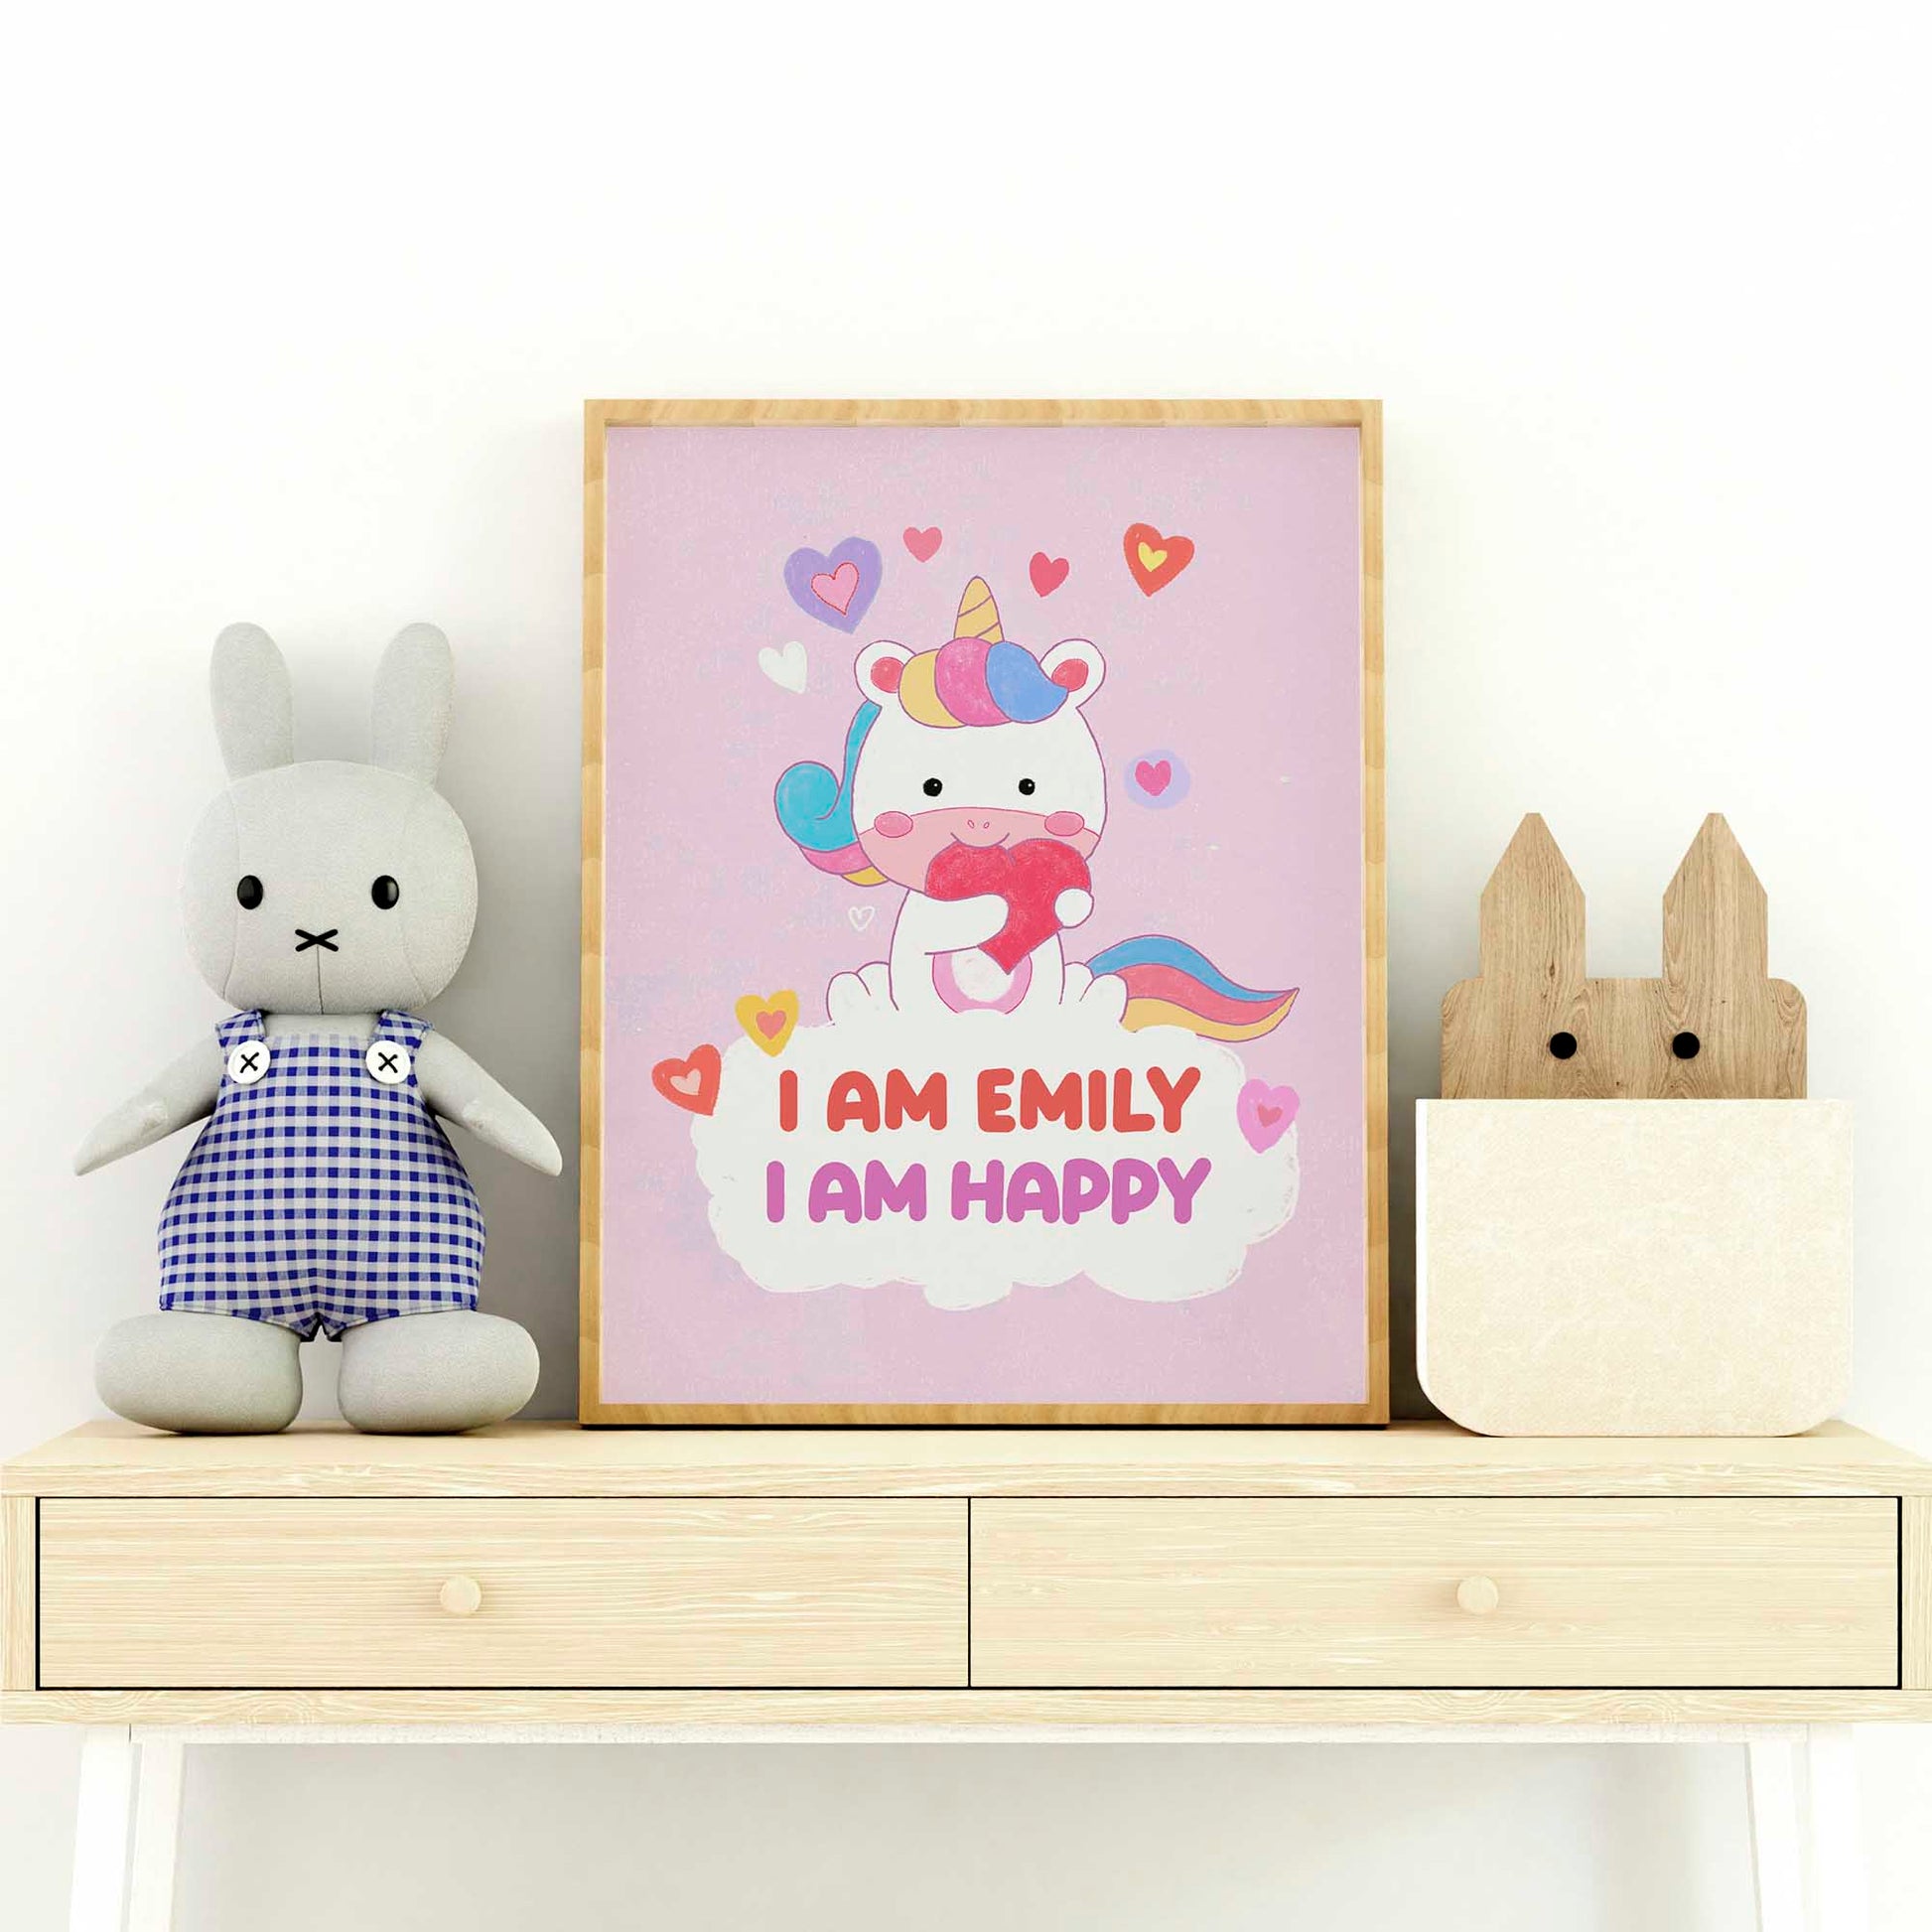 Enchanting unicorn poster with positive affirmations, designed for girl's personal growth.